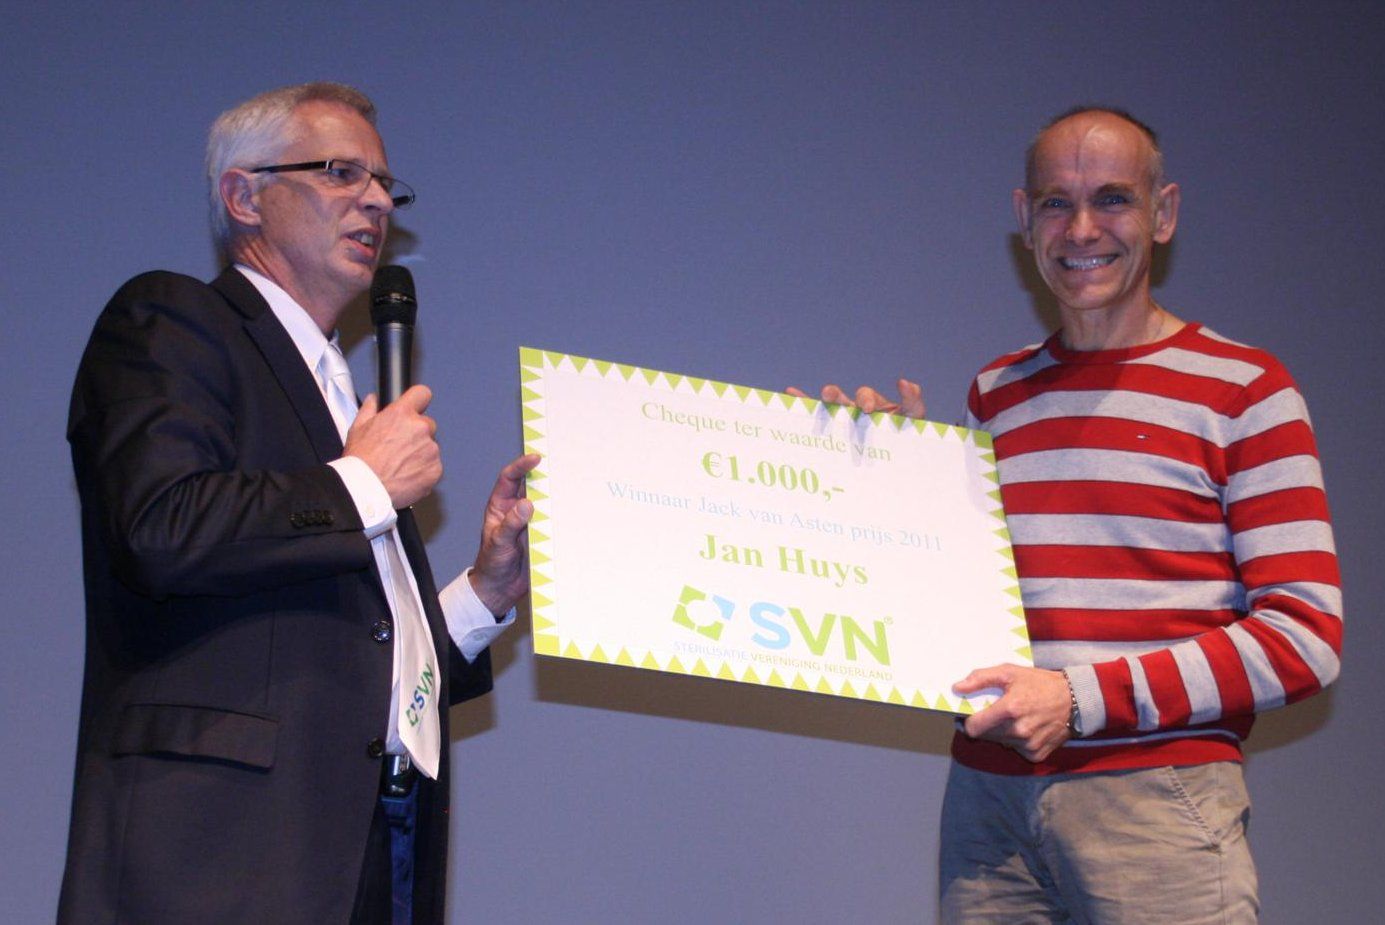 A special birthday gift: Jan receives the first SVN Jack van Asten Award during the autumn congress in De Rehorst in Ede. The award is given once in two years